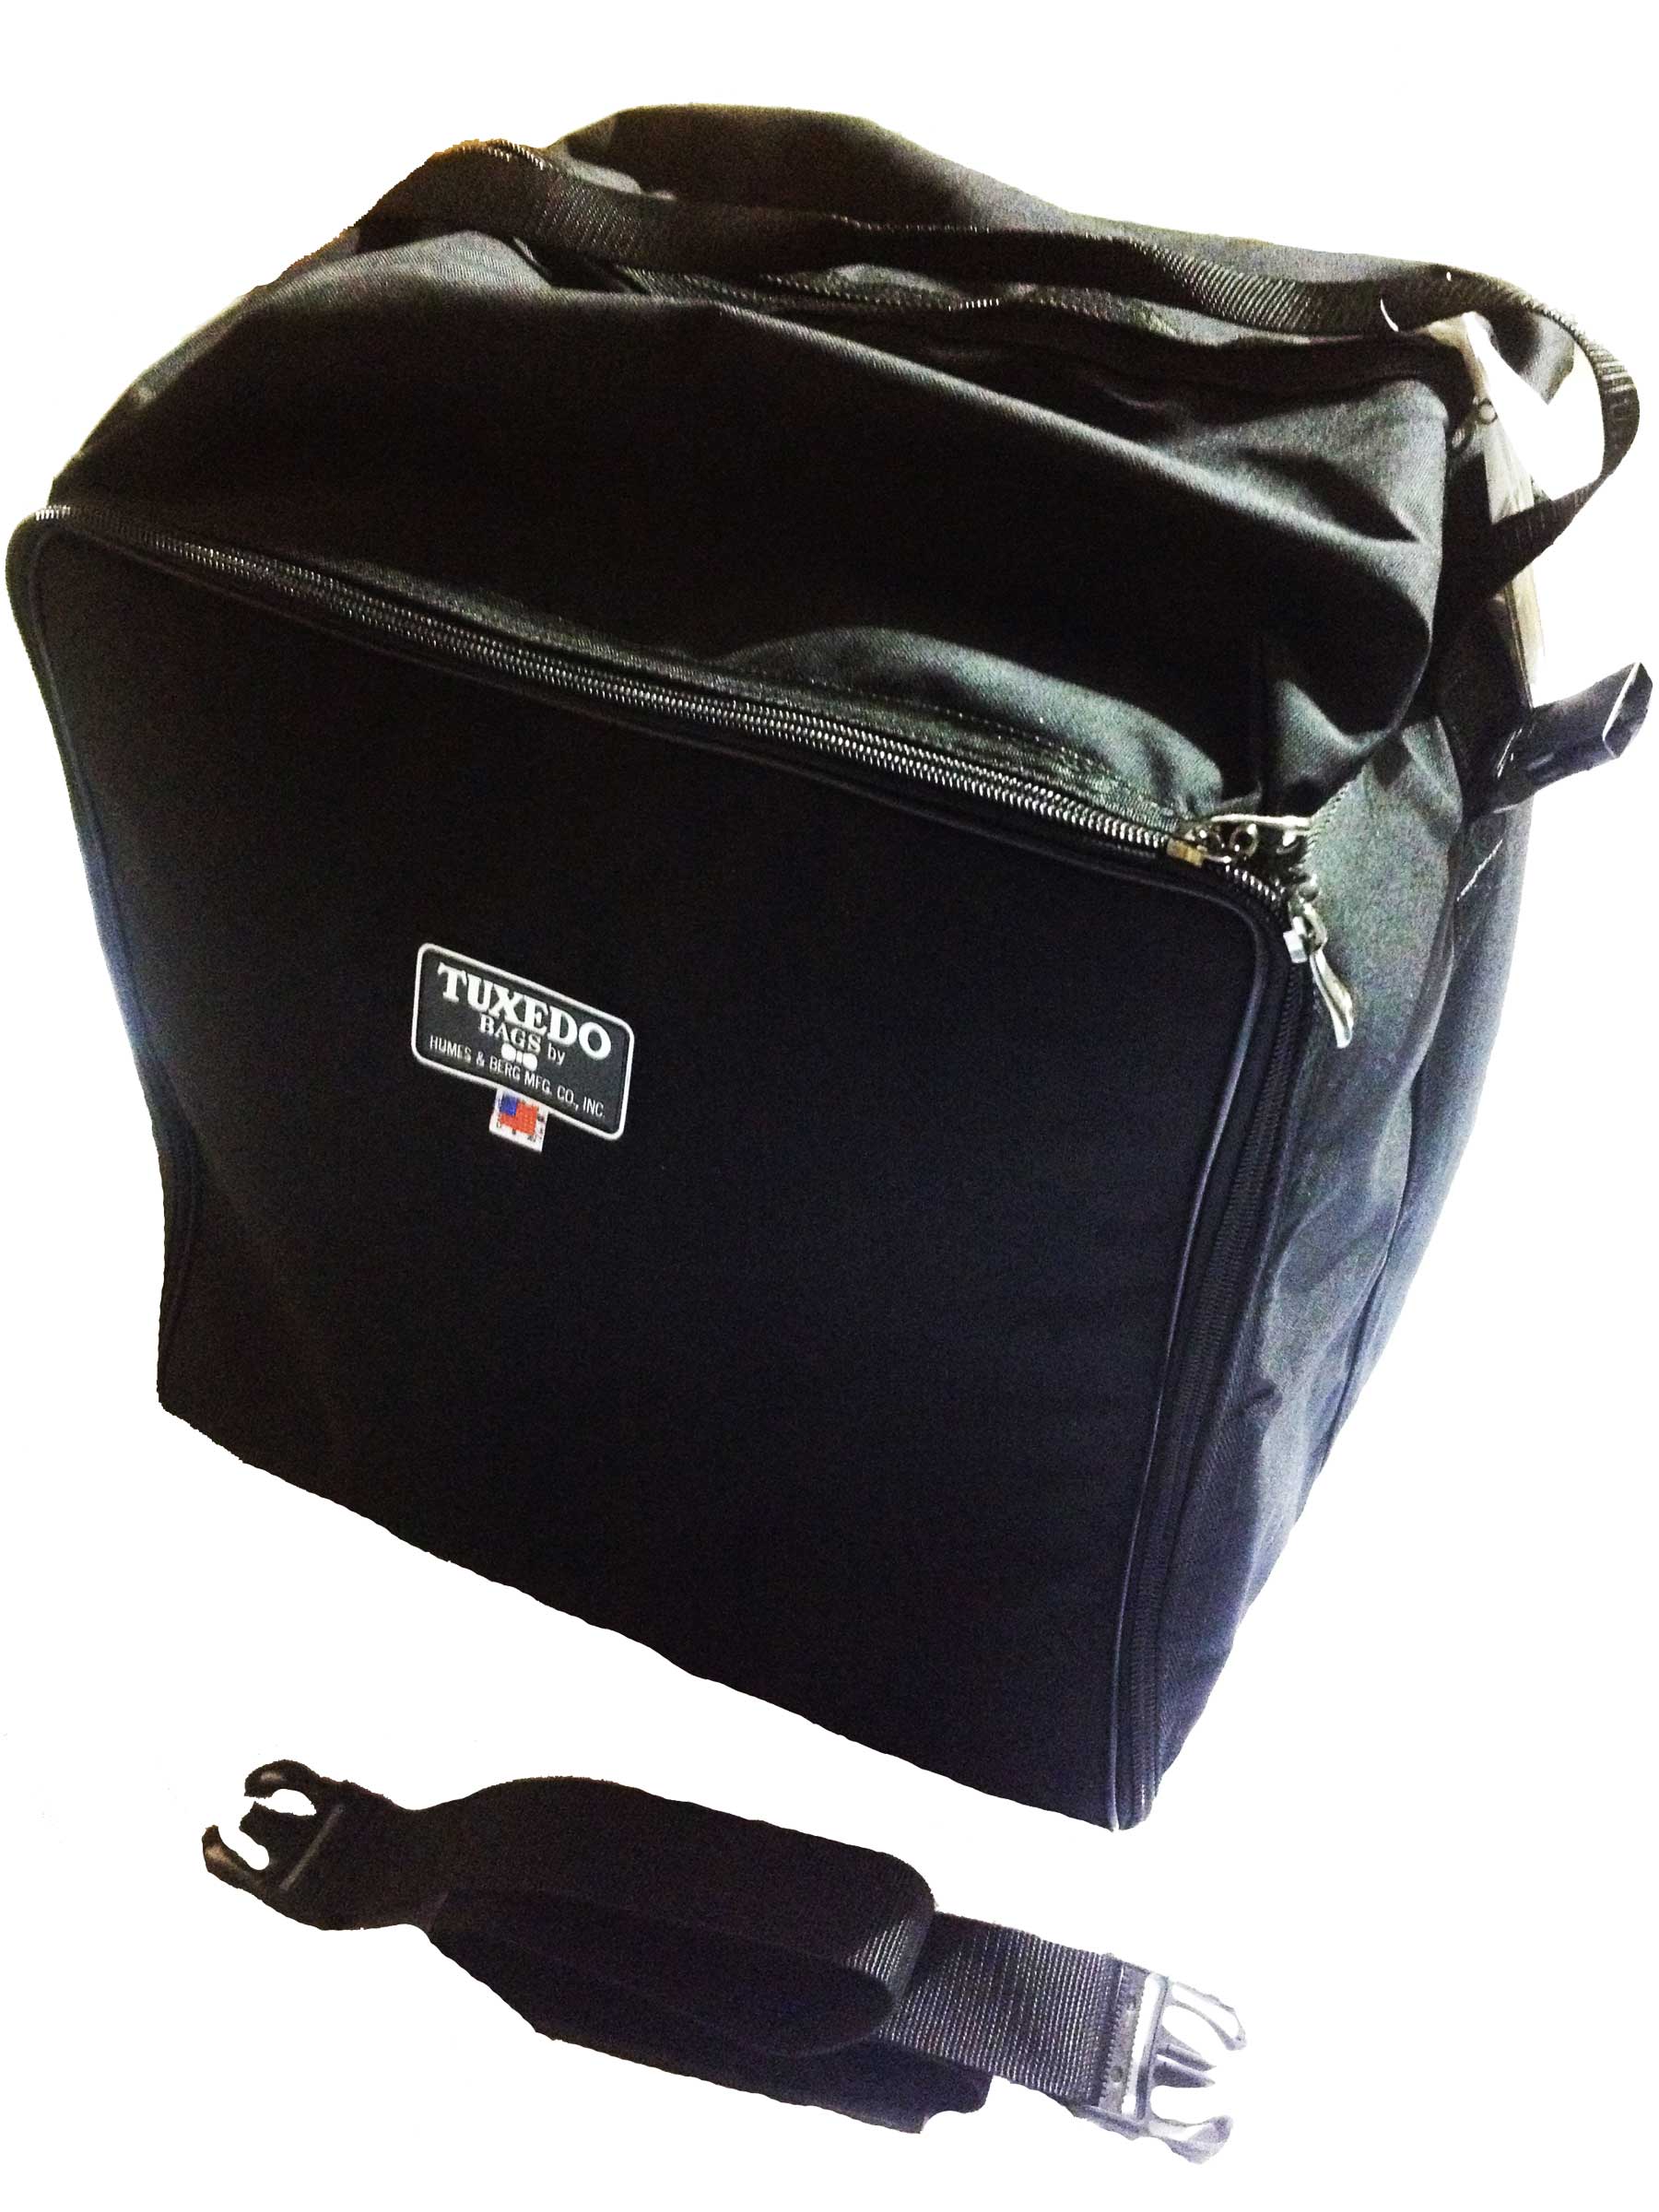 H&B Tuxedo Square 12 x 14 Inches Marching Snare Drum Bag